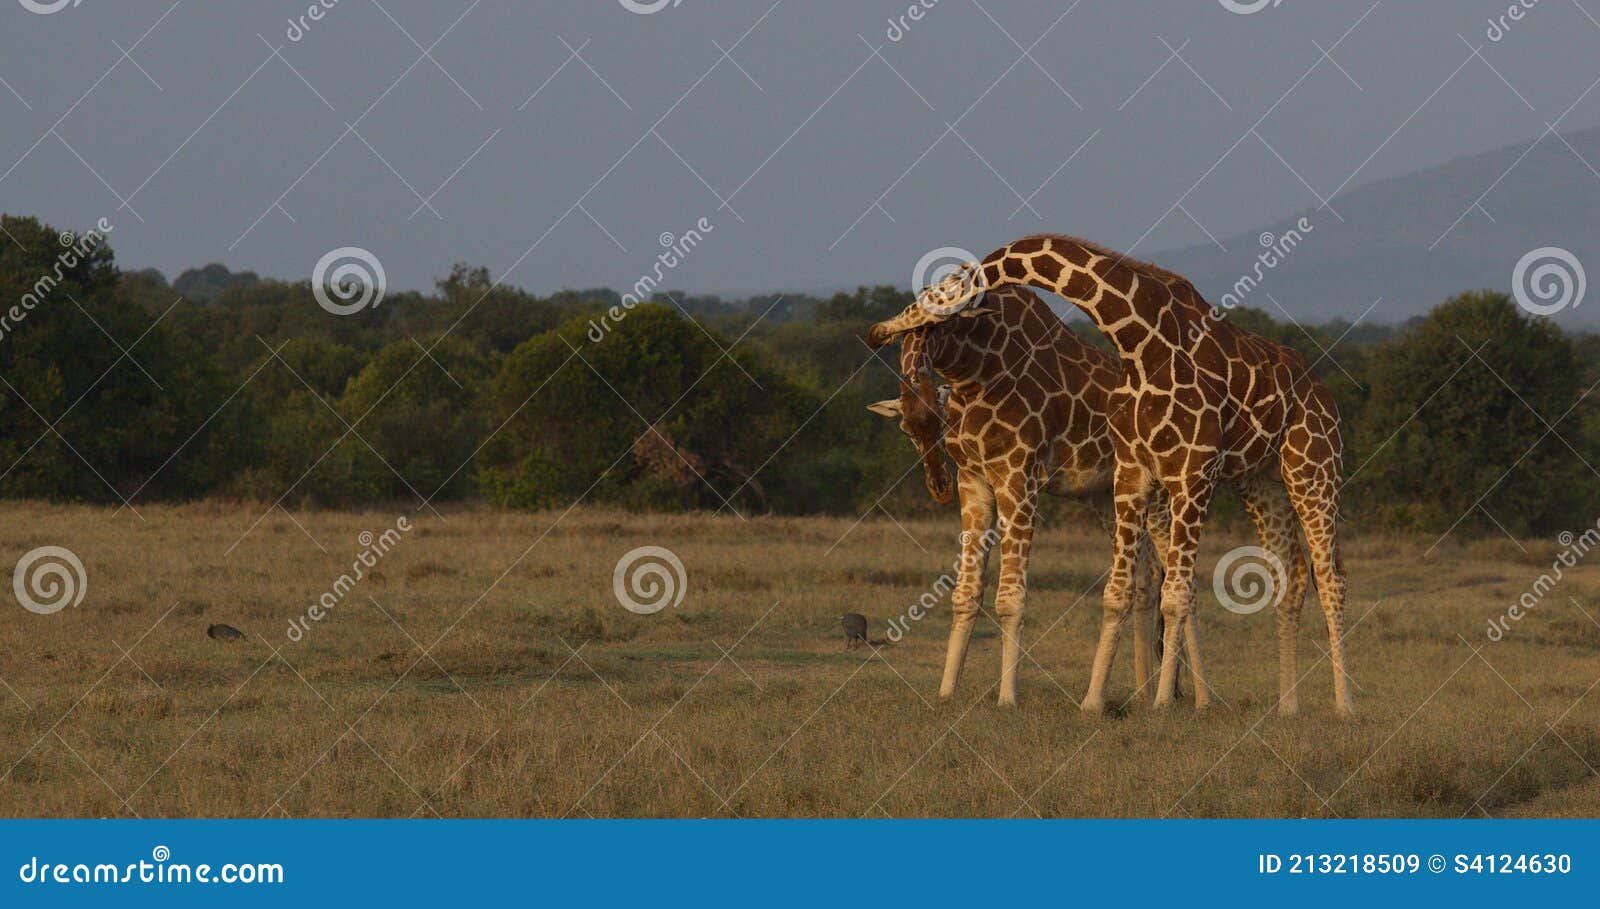 a pair of giraffes standing and engaging in necking behaviour in the wild, kenya